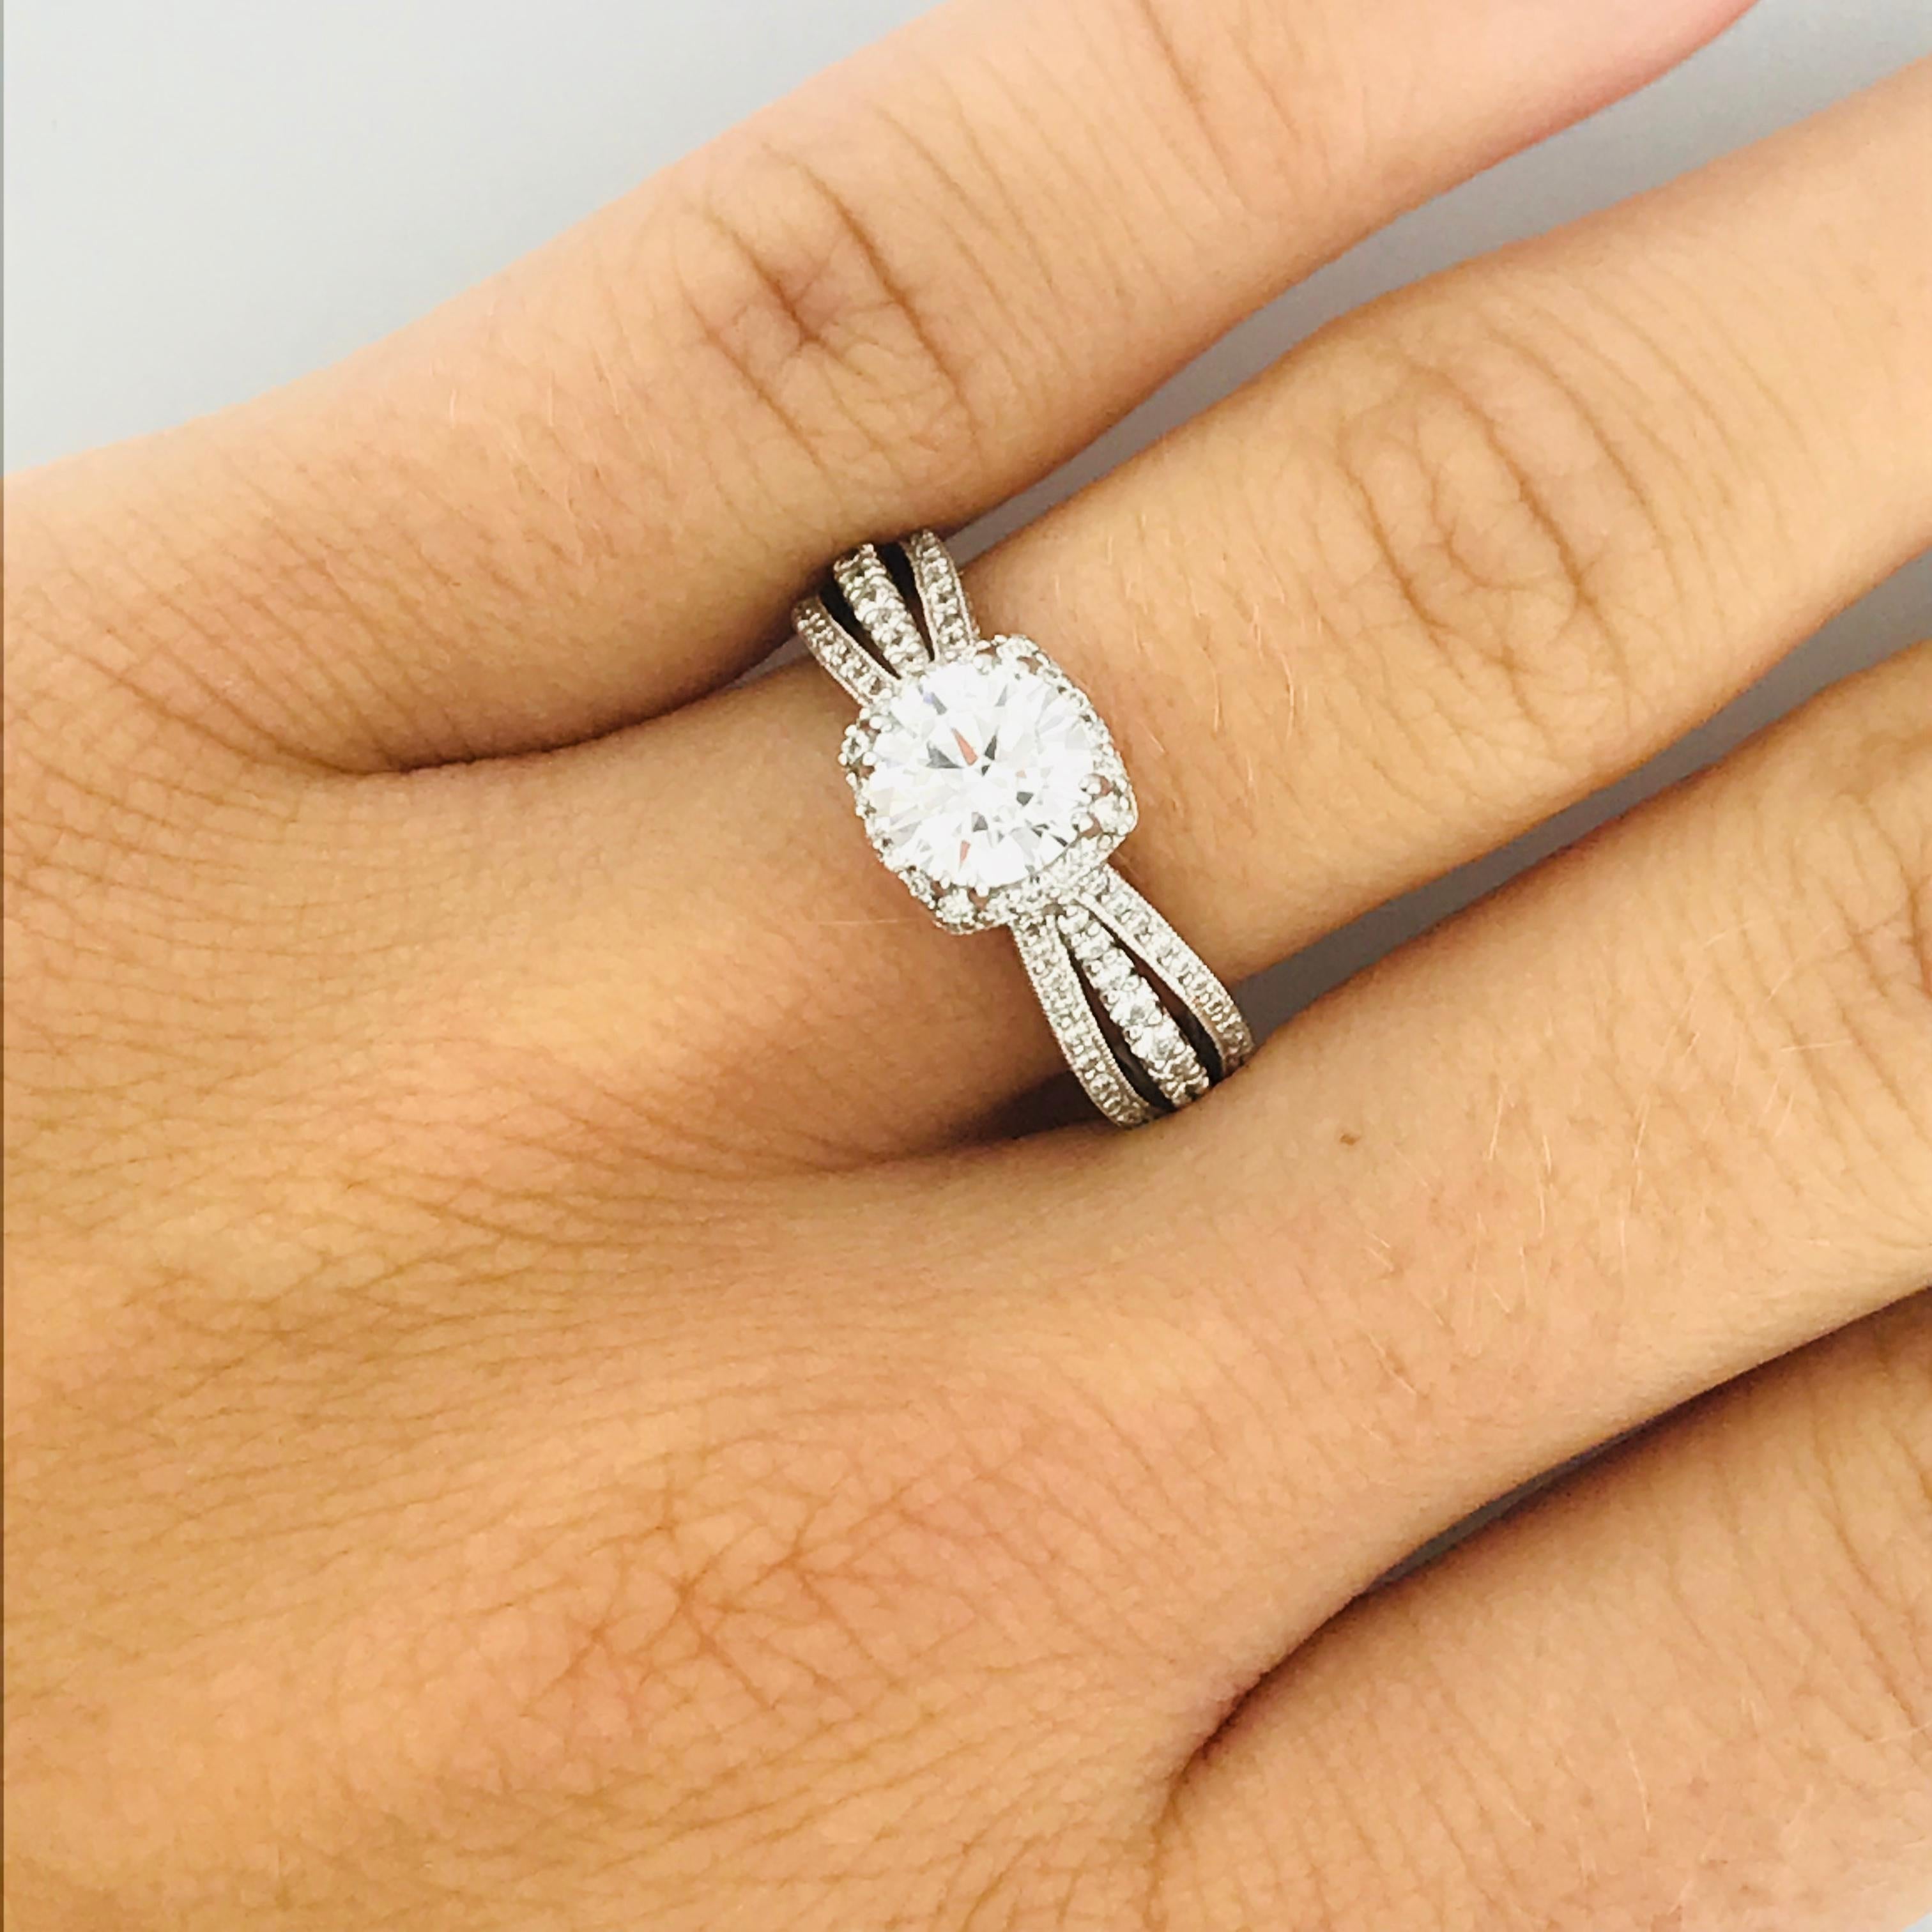 This is an original TACORI ENGAGEMENT RING! The ring has the Tacori authorized style number, 101373. The 18 karat white gold Tacori engagement ring holds a GIA CERTIFIED 1.02 carat ROUND BRILLIANT DIAMOND. The round brilliant diamond is an eye clean